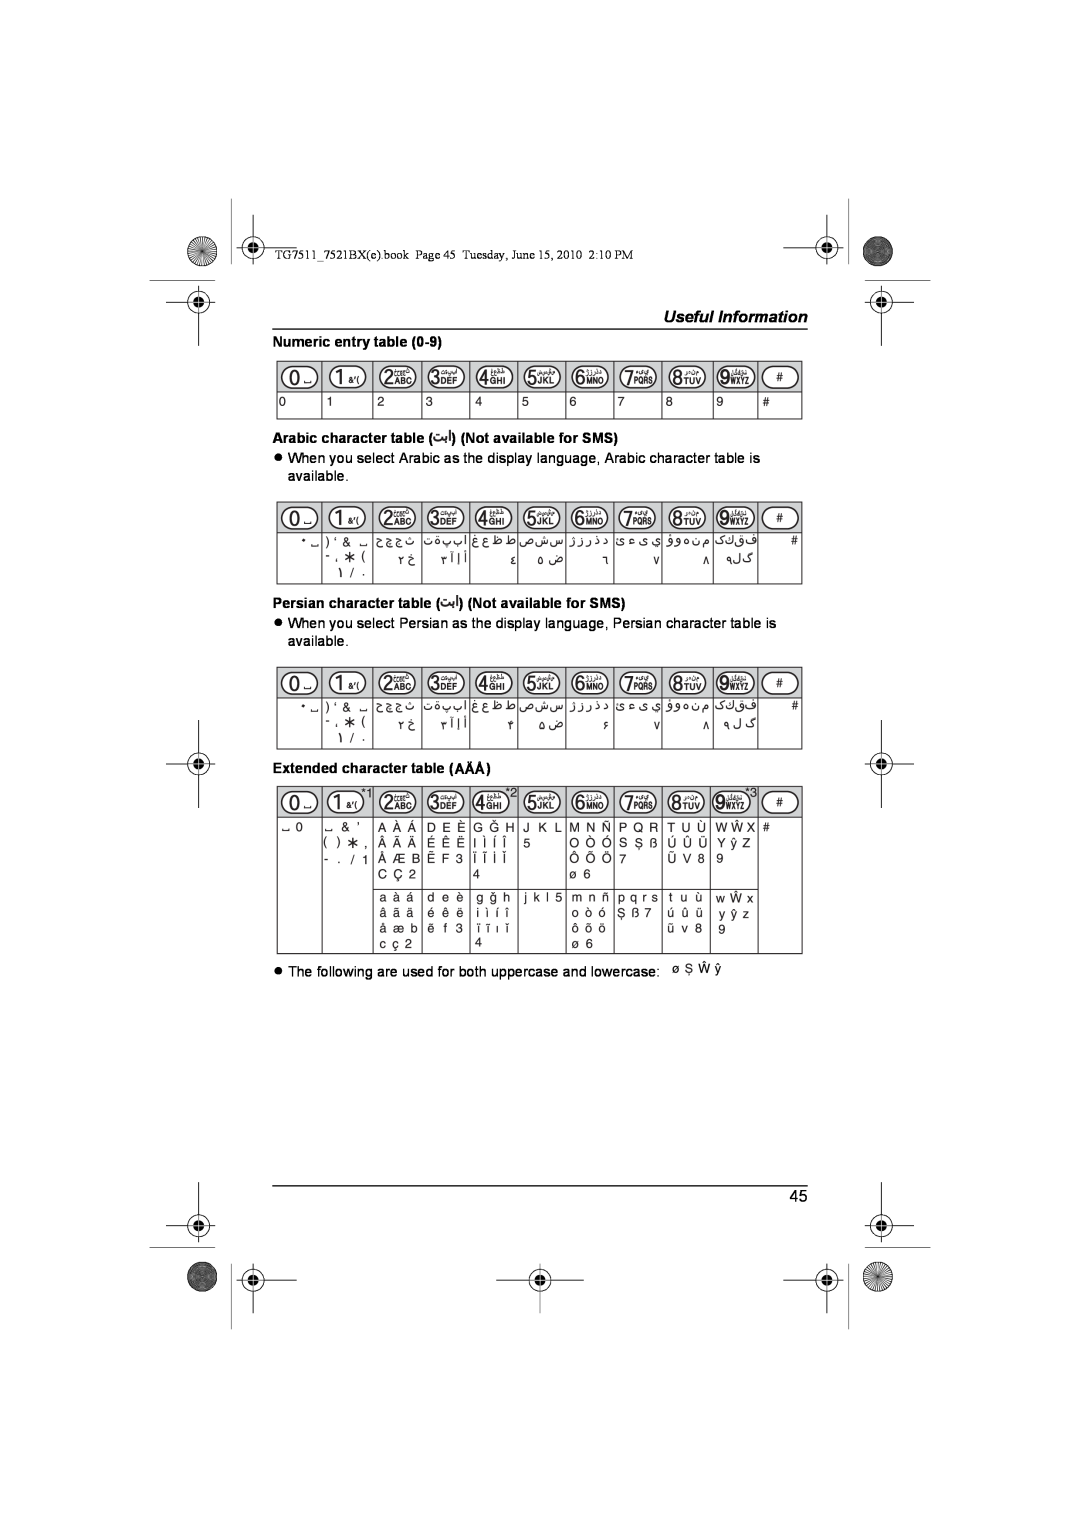 Panasonic KX-TG7511 Numeric entry table Arabic character table Not available for SMS, Extended character table N 